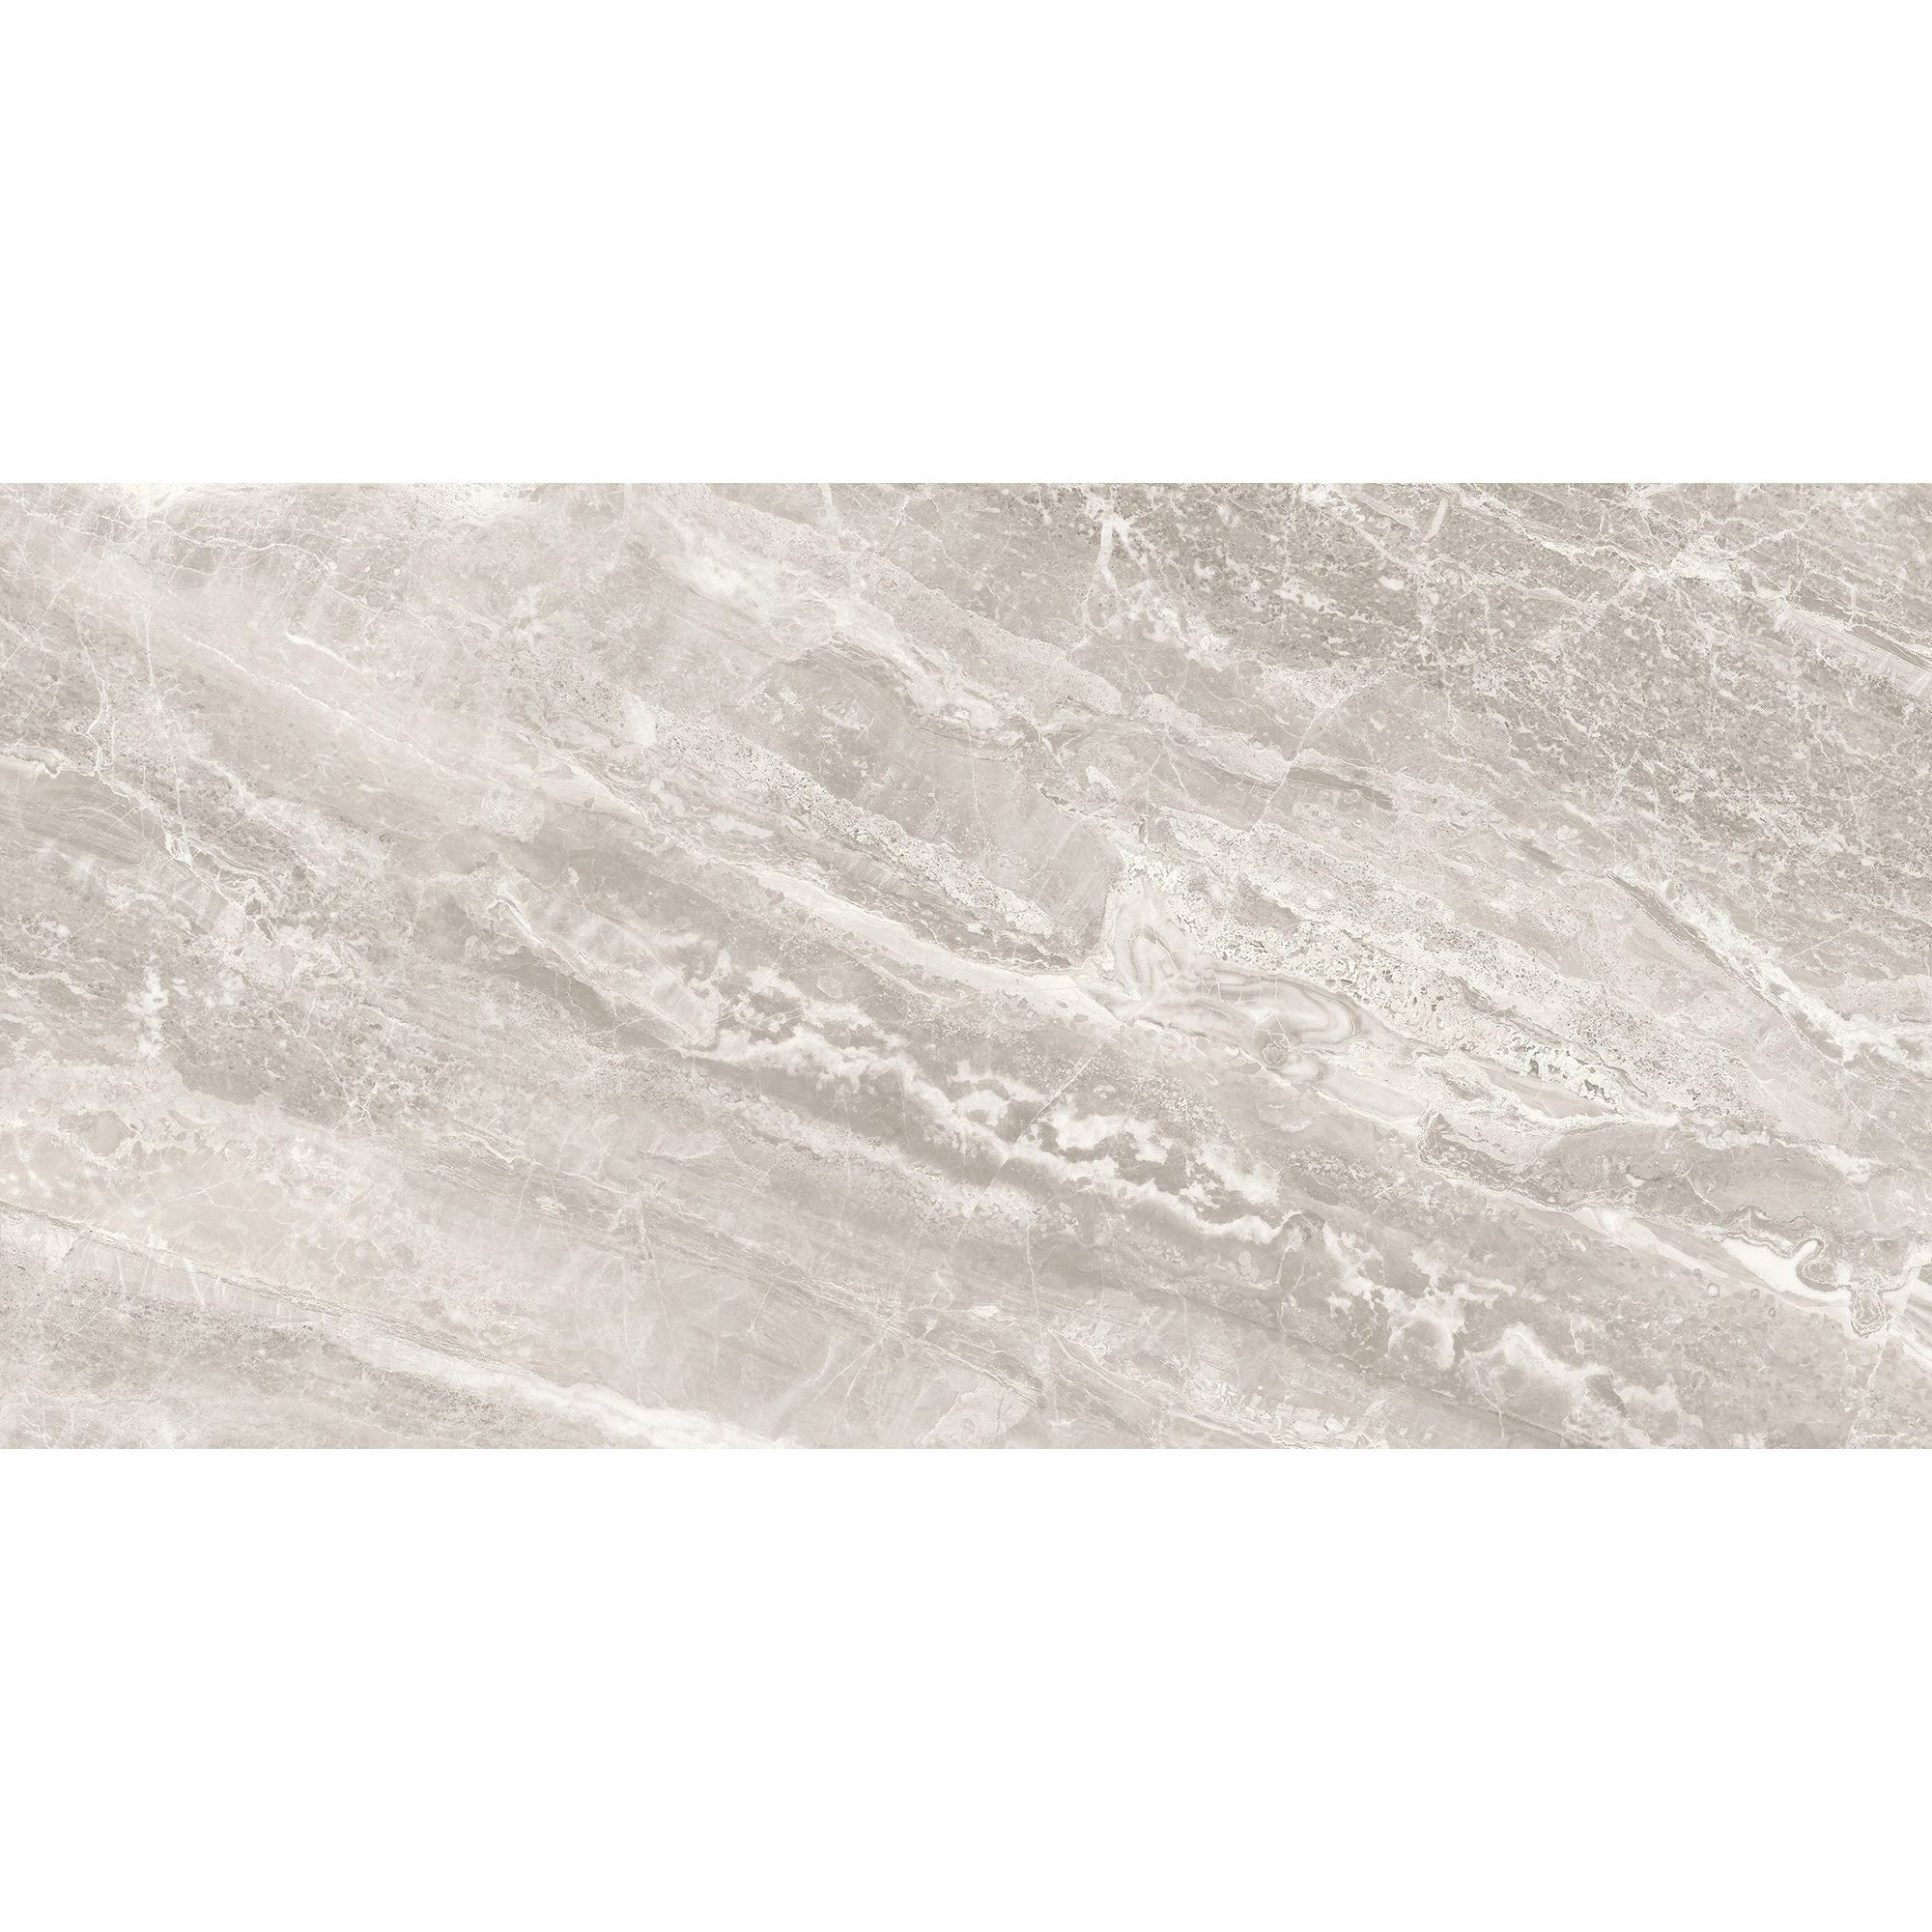 Anatolia Mayfair 16 in. x 32 in. HD Rectified Porcelain Tile - Stella Argento (Polished)